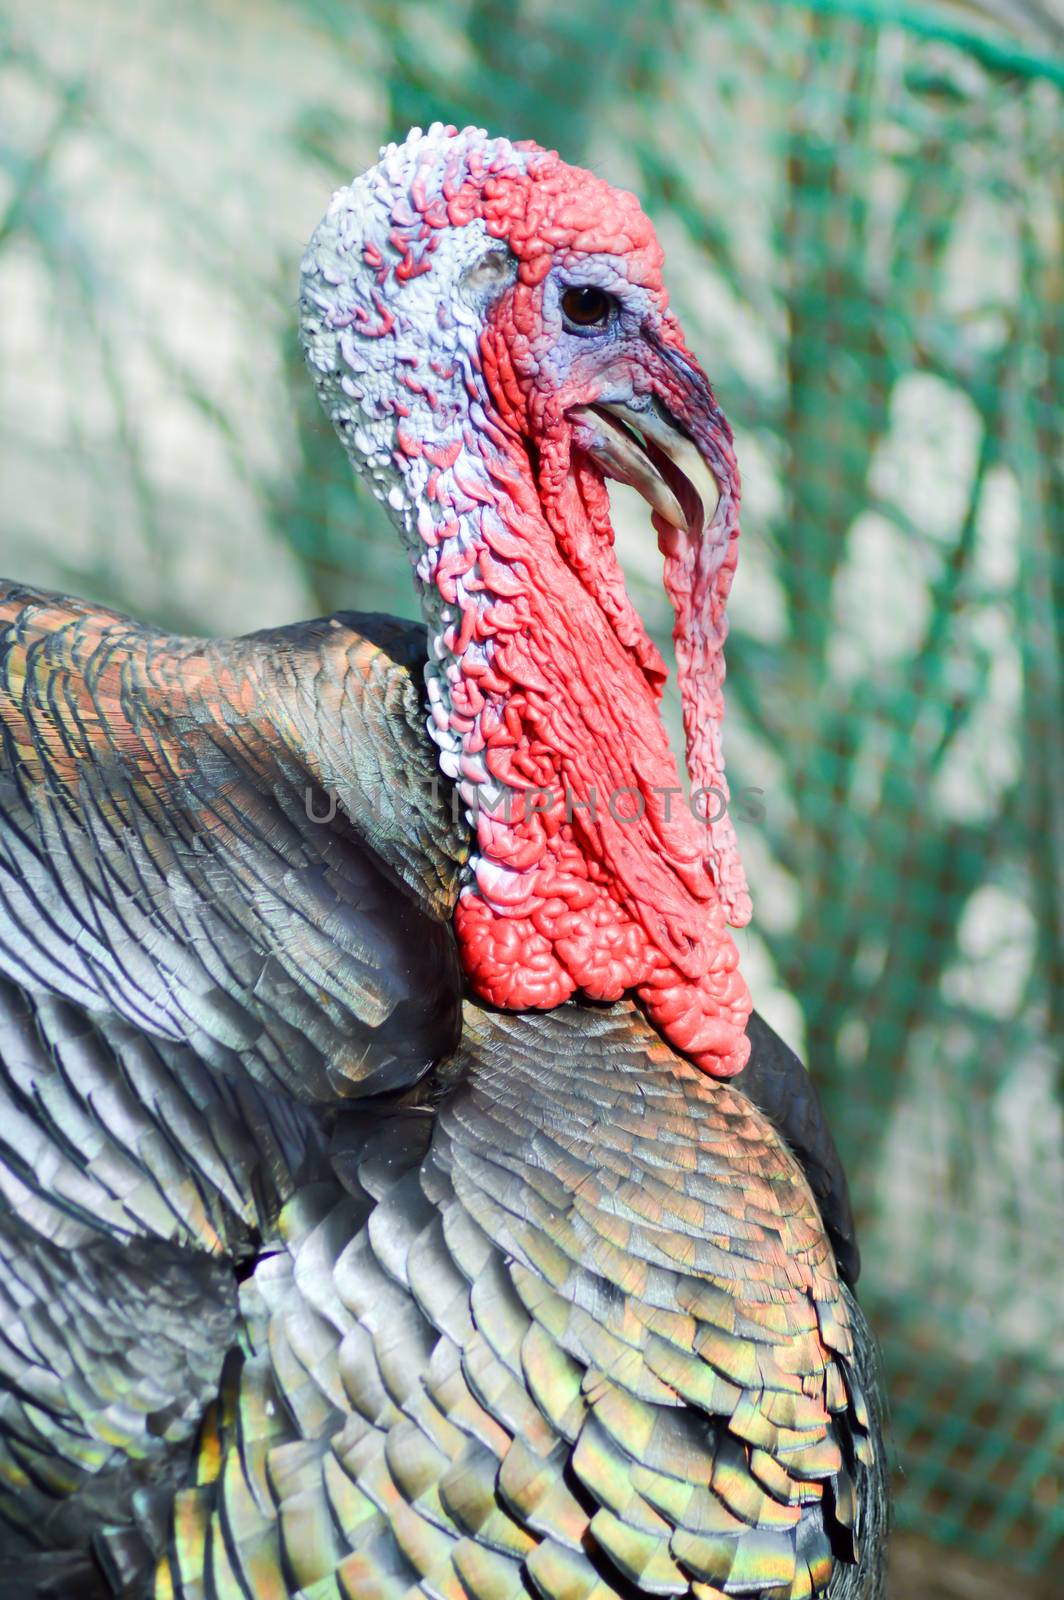 View of a turkey head in a chicken coop